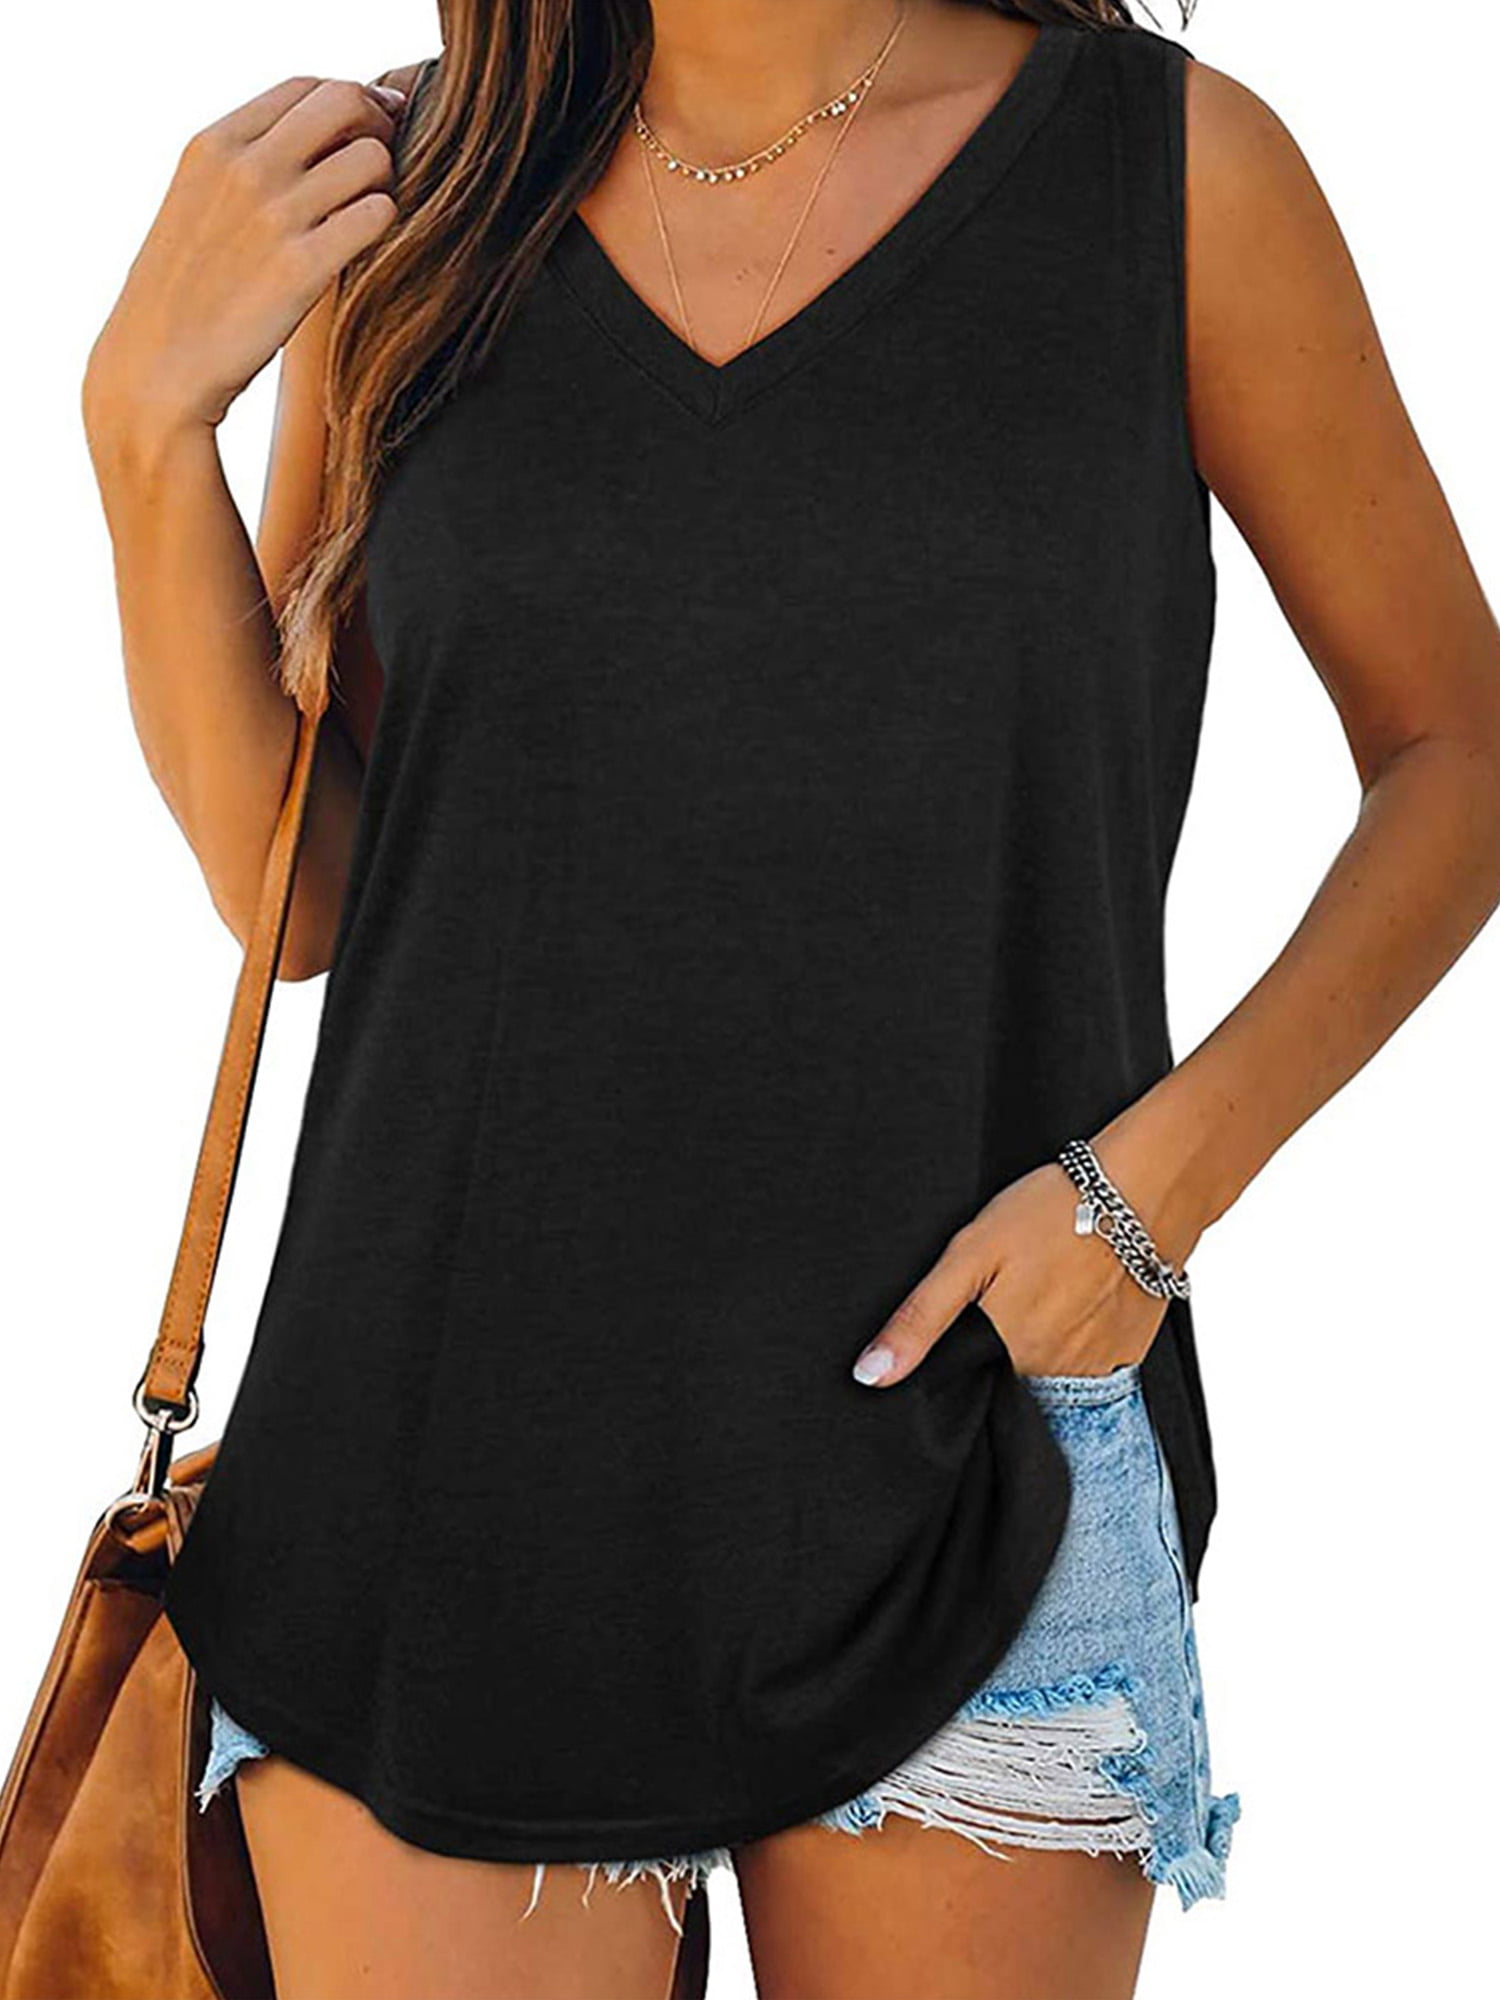 LilyLLL Womens Loose Solid Color Sleeveless V Neck Tunic Blouse Tank ...